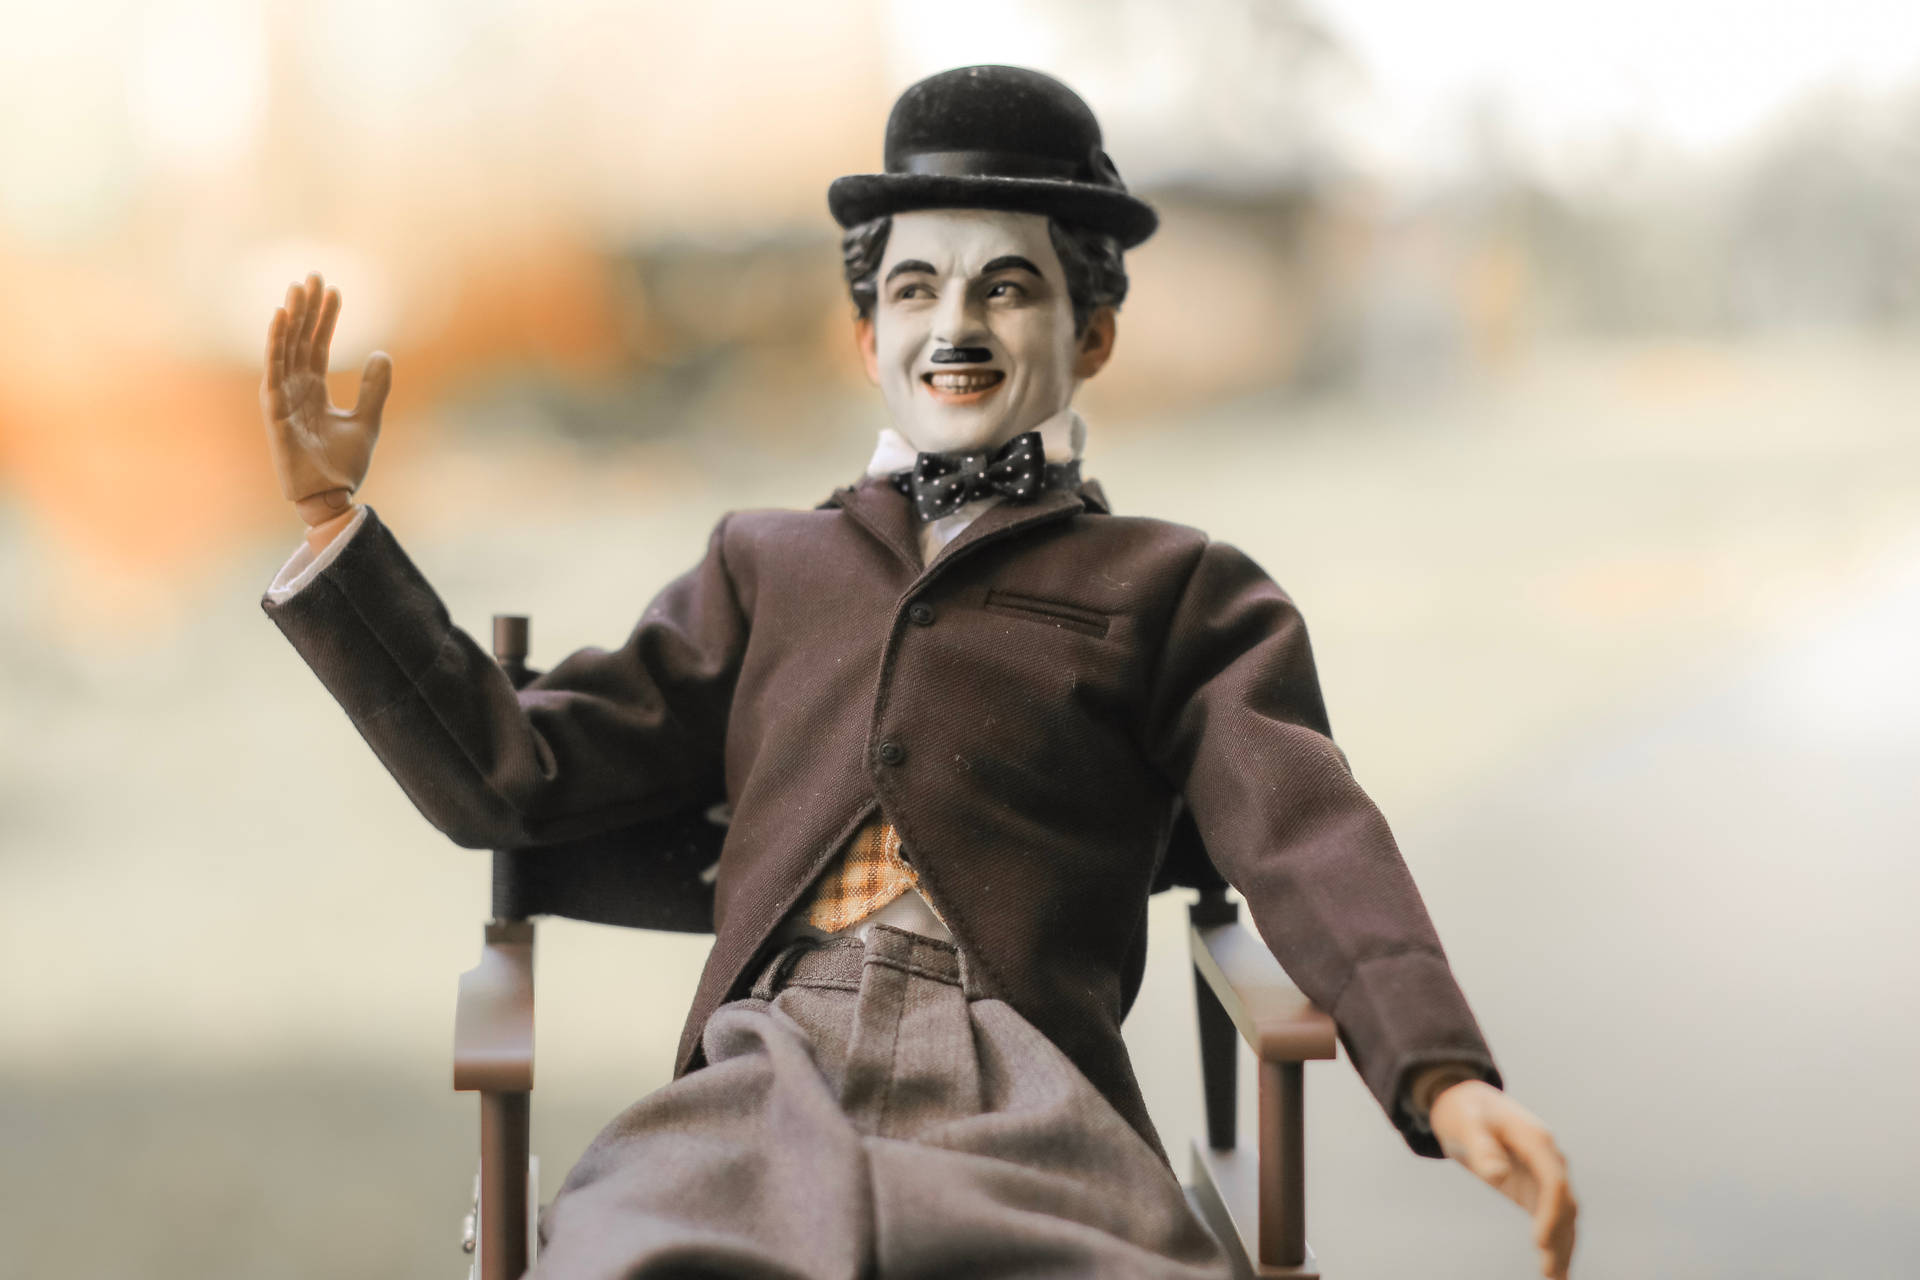 A Uniquely Colored Charlie Chaplin Figurine Background